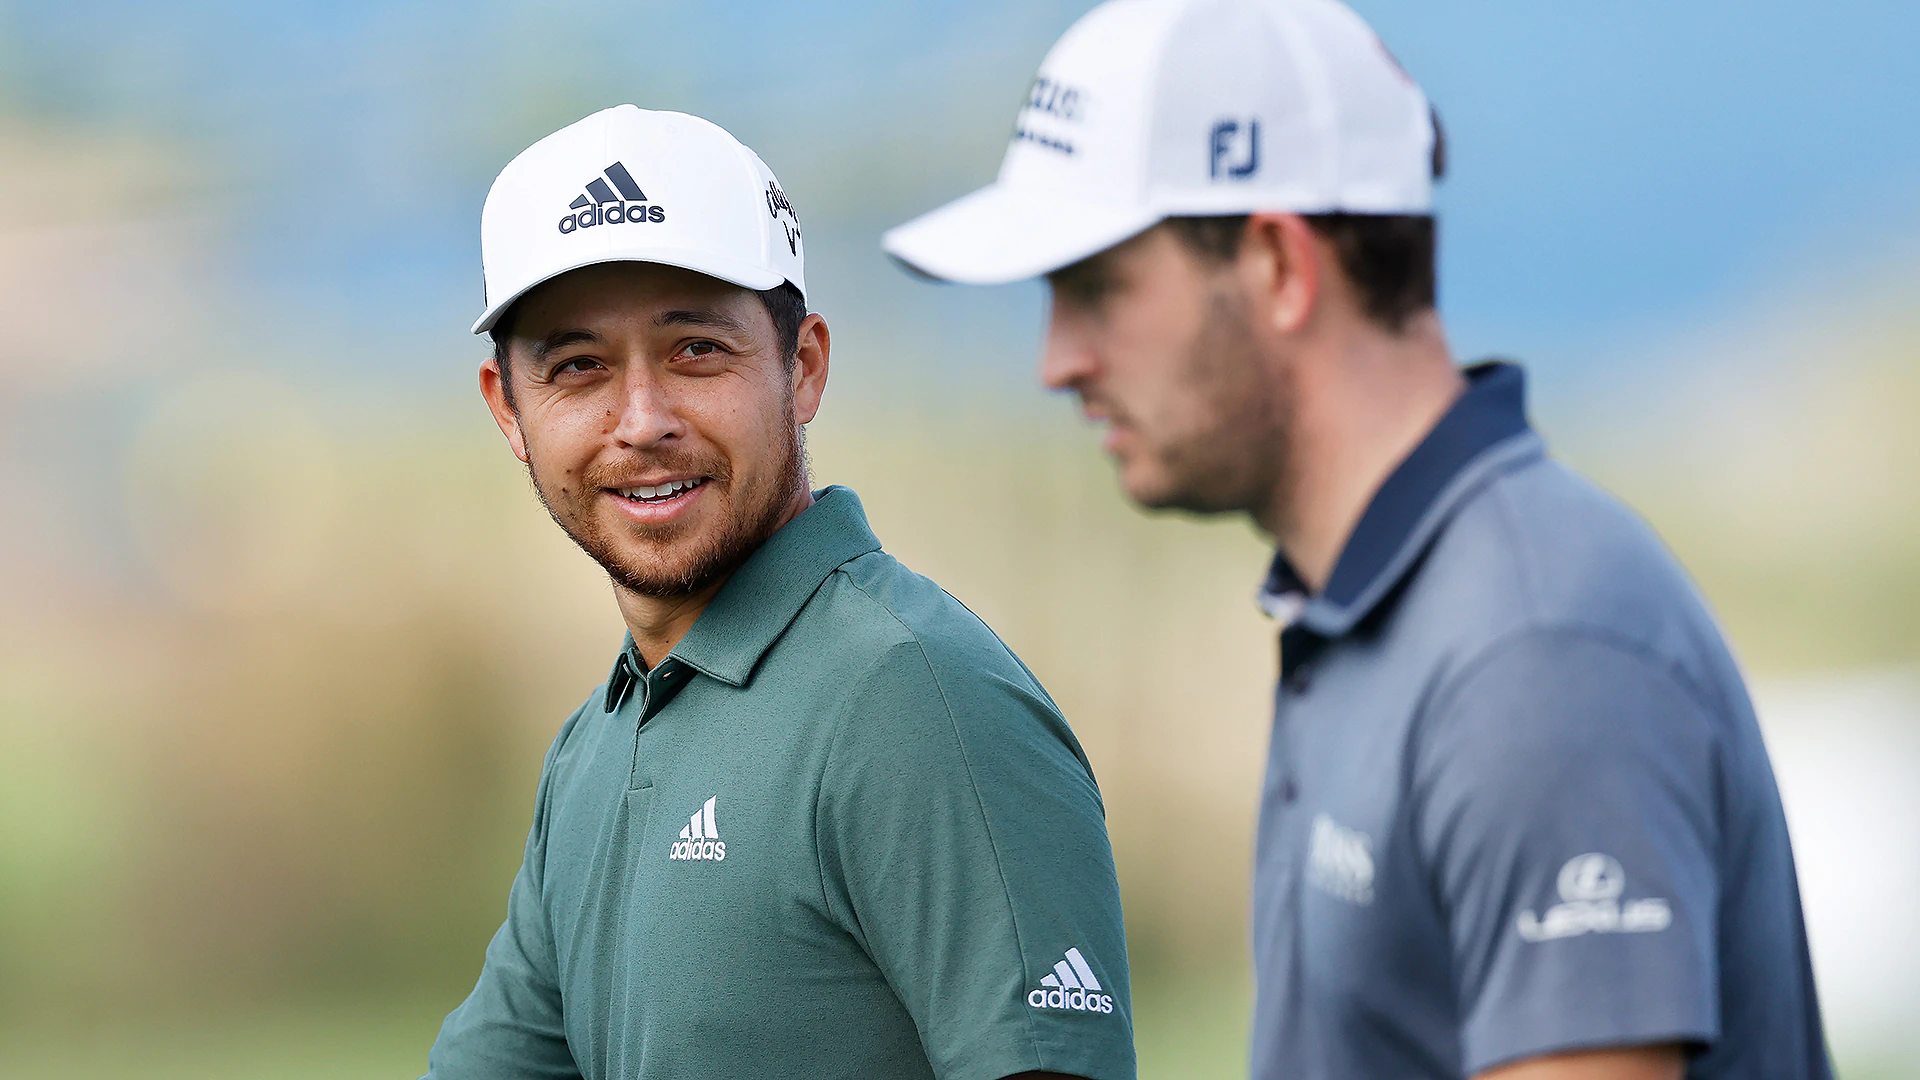 Xander Schauffele and PGA Tour players on Player Impact Program: ‘Rest is secondary’ to winning